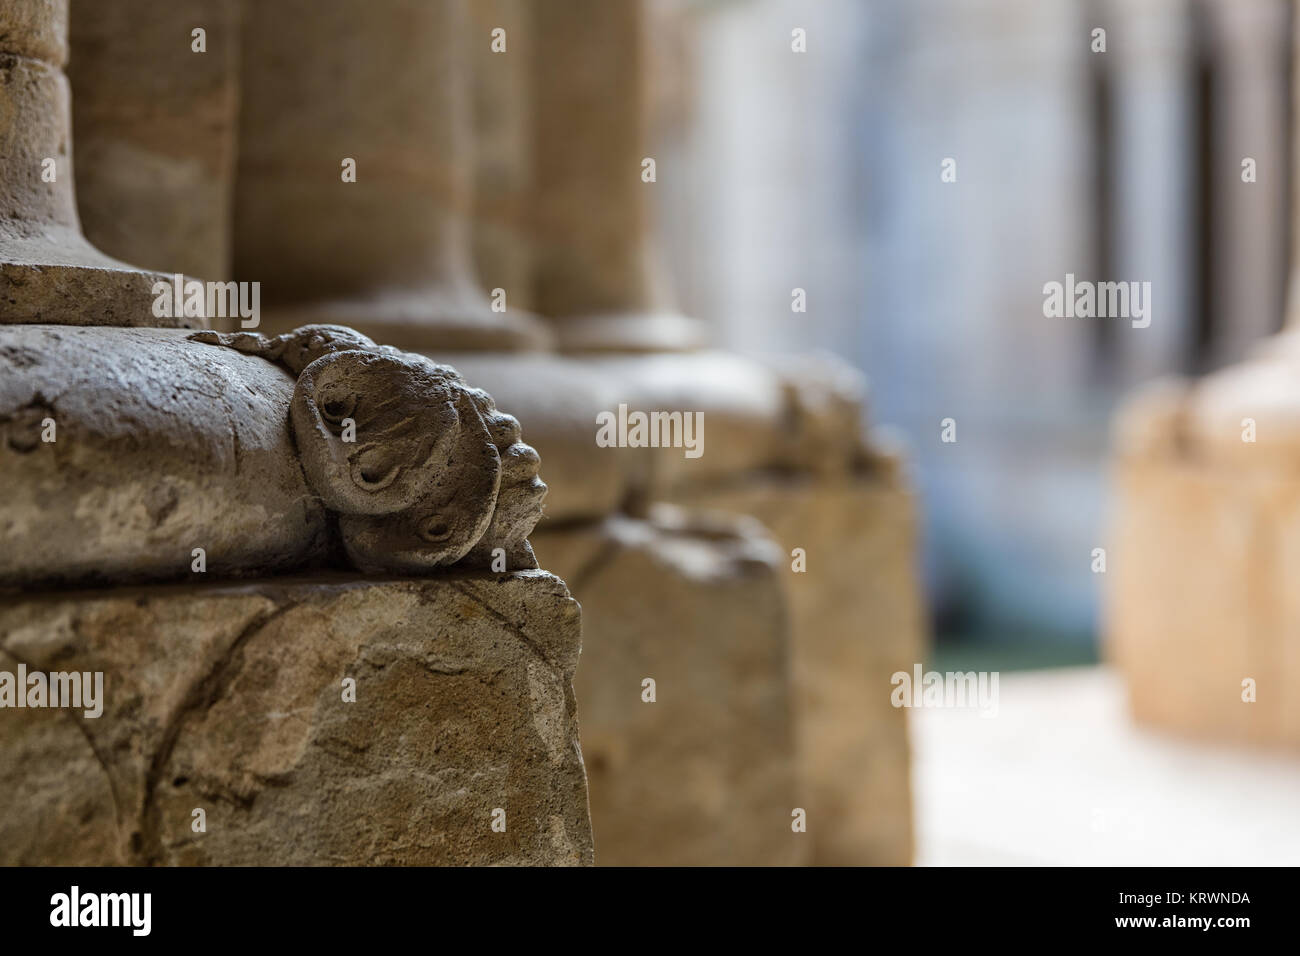 Small figure on the basis of a column of the cloister at the Cathedral of Ciudad Rodrigo. Spain. Stock Photo